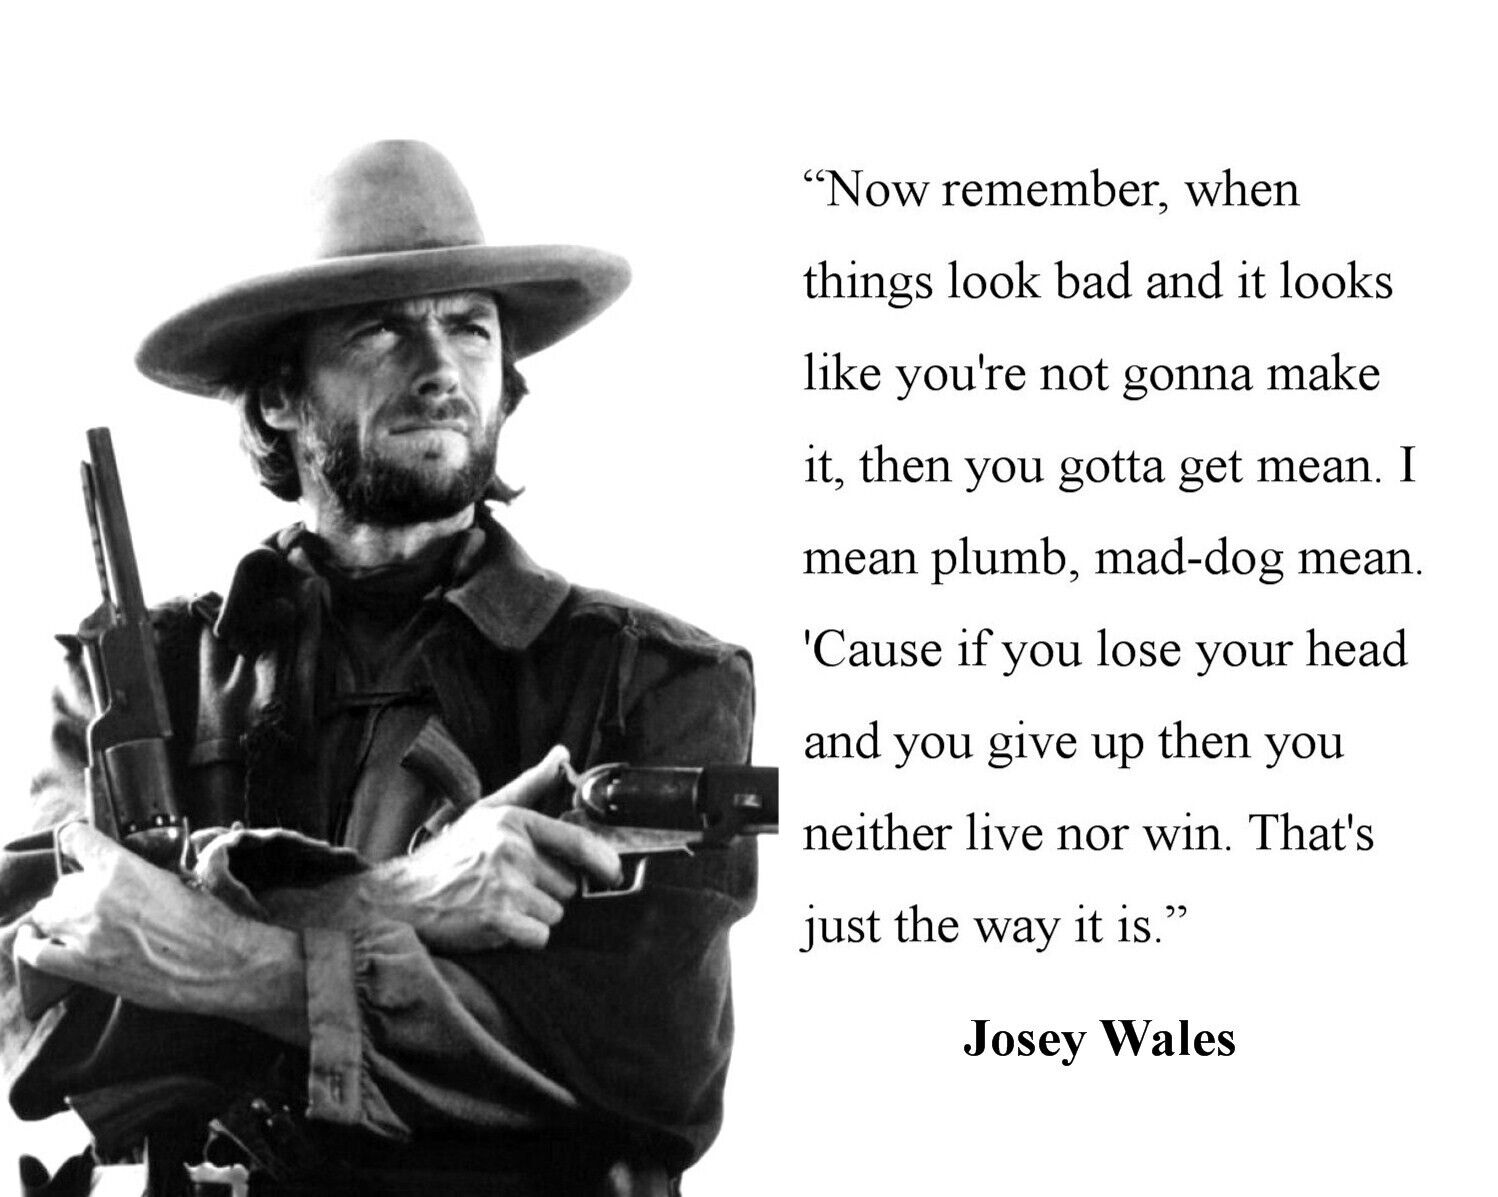 Josey Wales Clint Eastwood Quote 11 x 14 Photo Photograph Picture